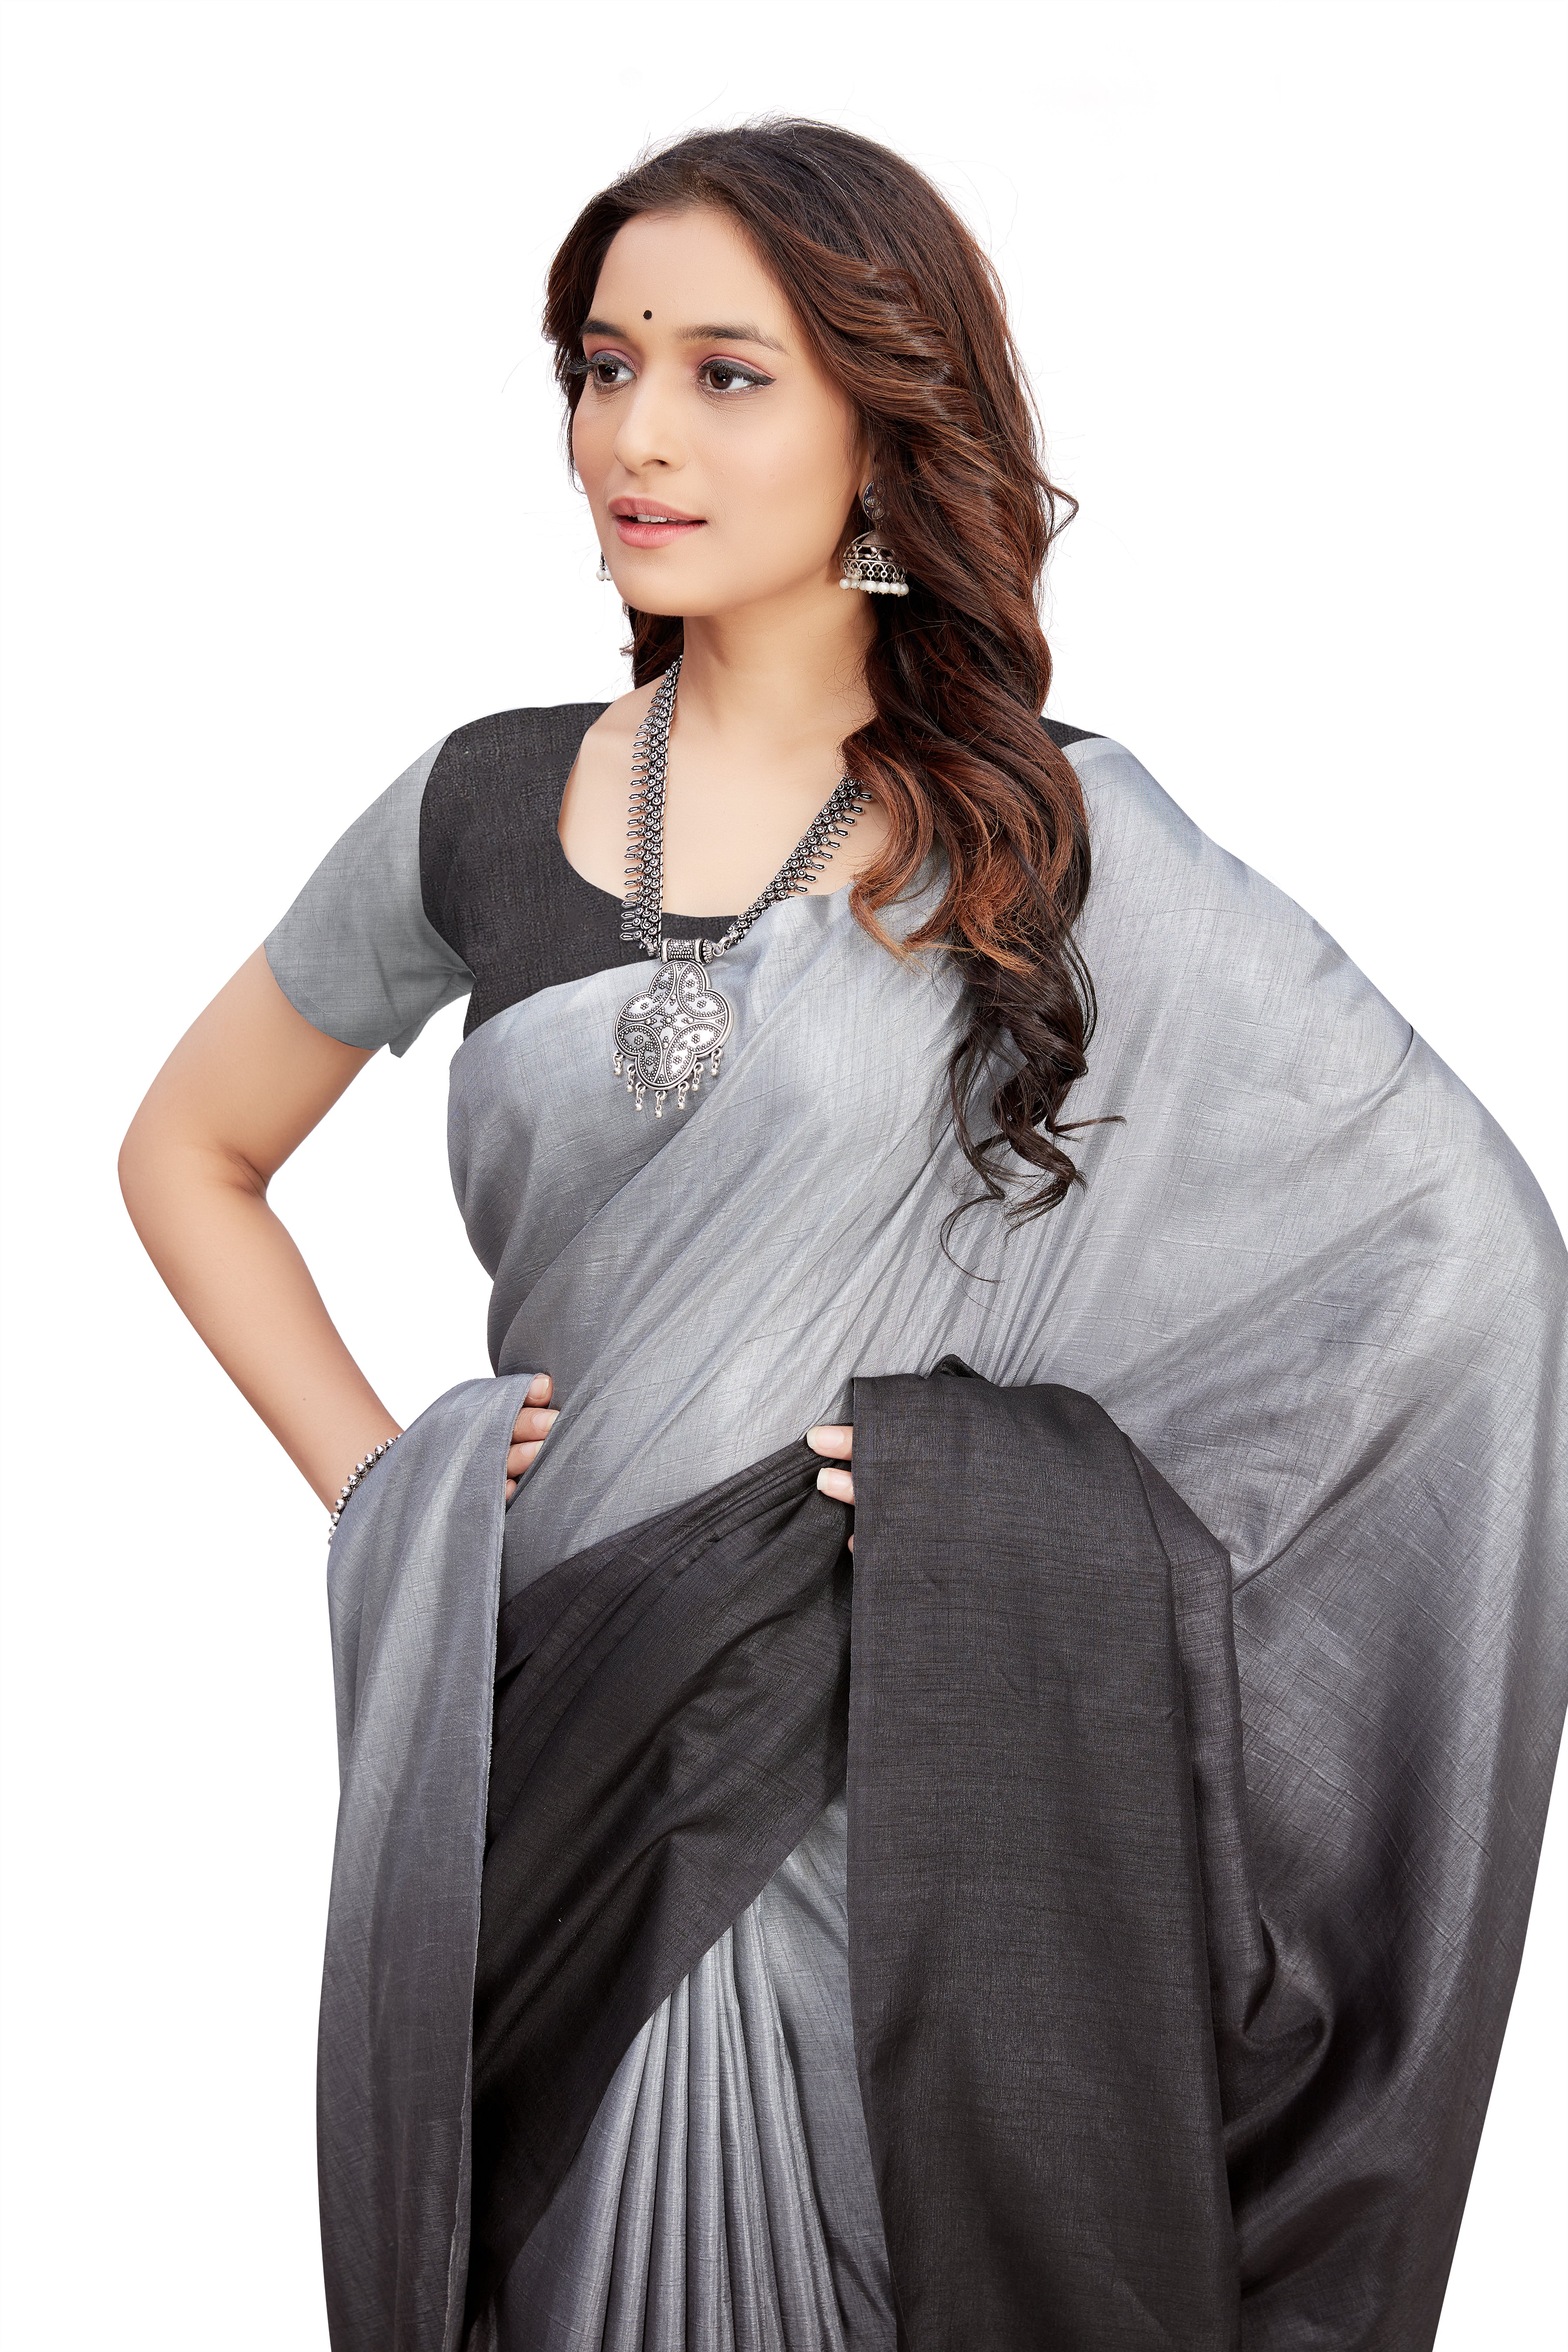 Women's self Woven Solid Textured Dual Shade Festive Wear Silk Blend Sari With Blouse Piece (Grey) - NIMIDHYA